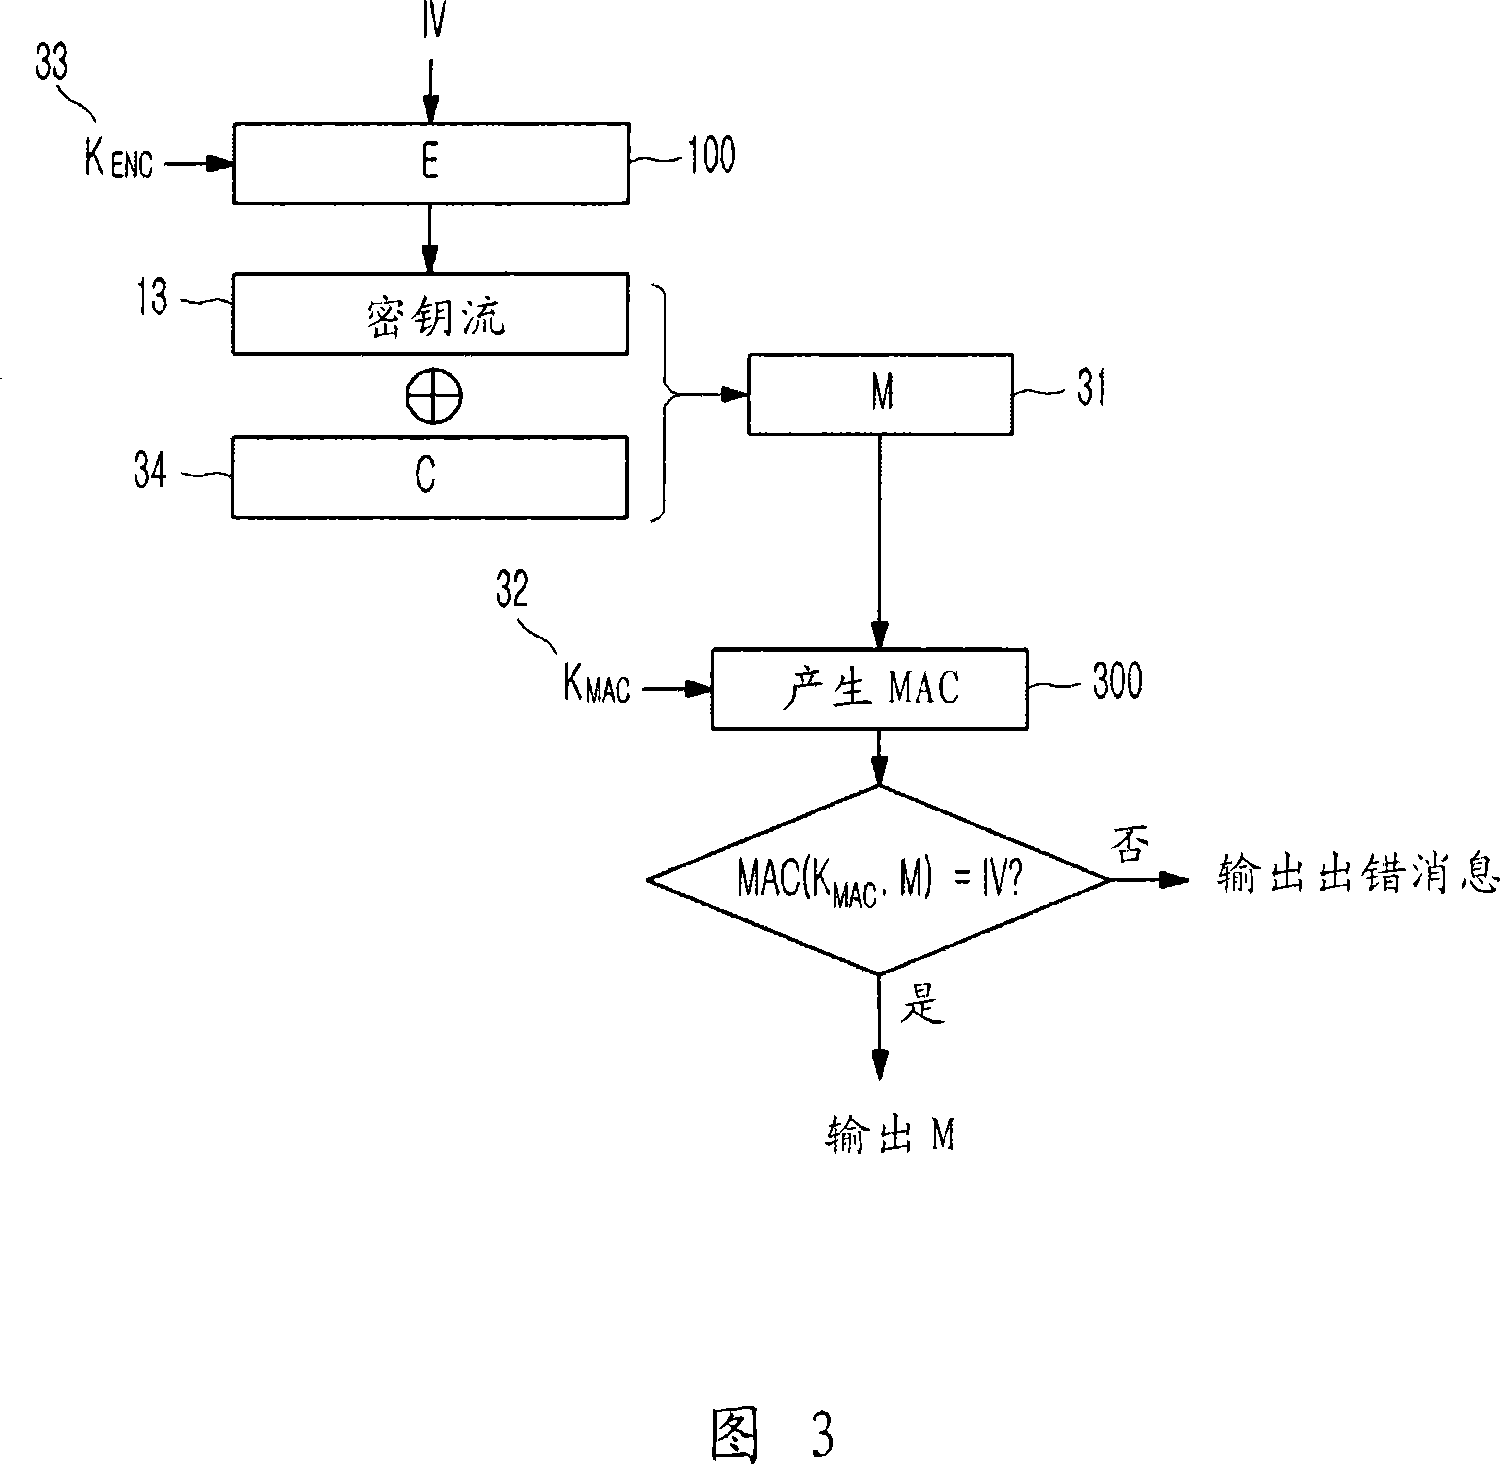 Method of generating message authentication code using stream cipher and authentication/encryption and authentication/decryption methods using stream cipher